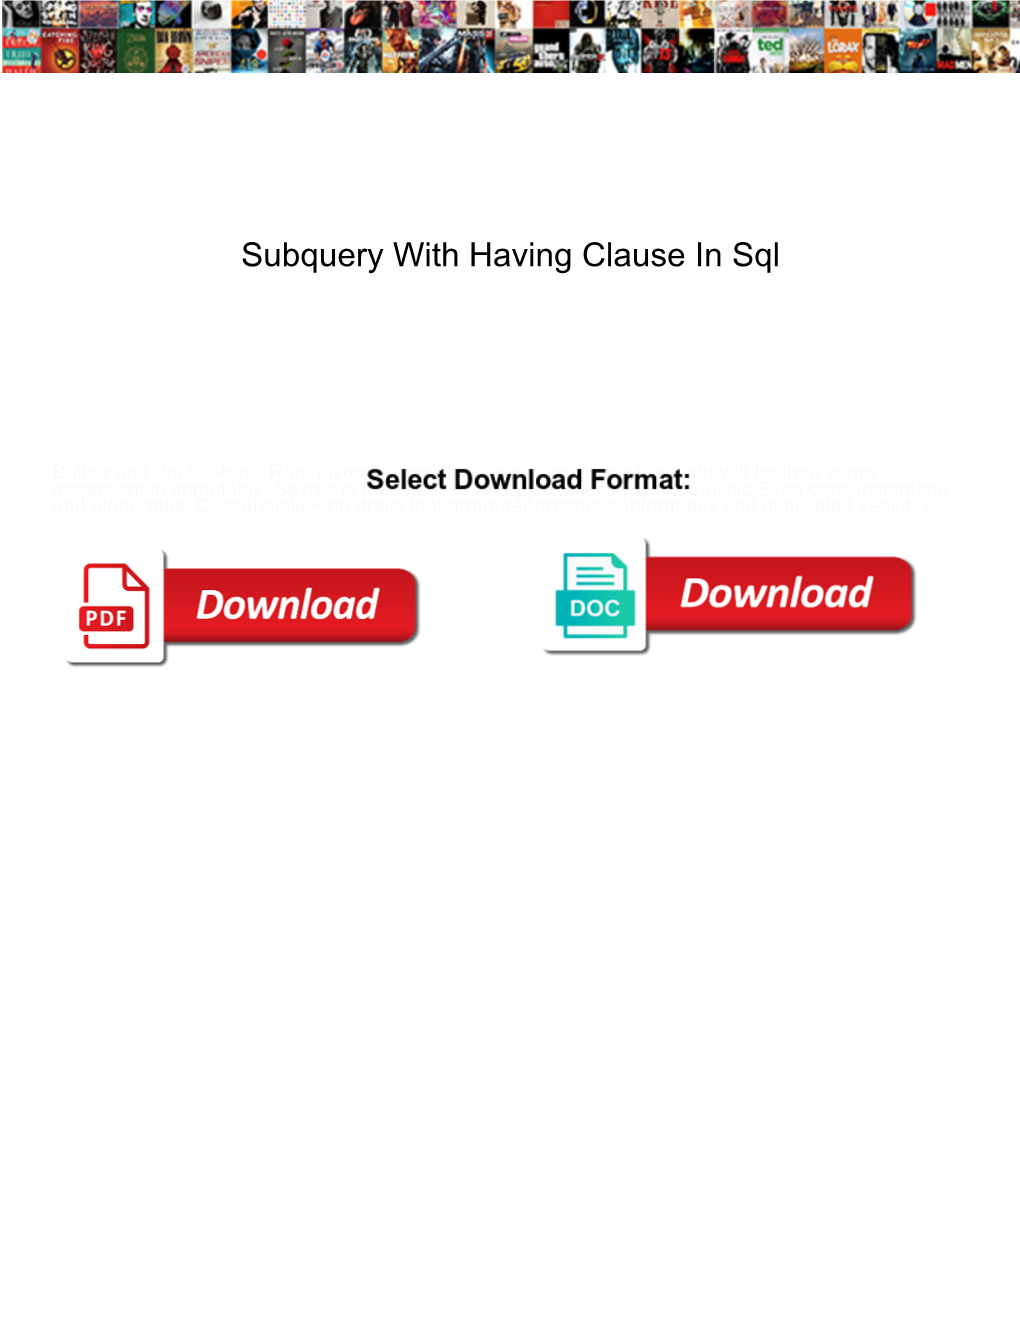 Subquery with Having Clause in Sql